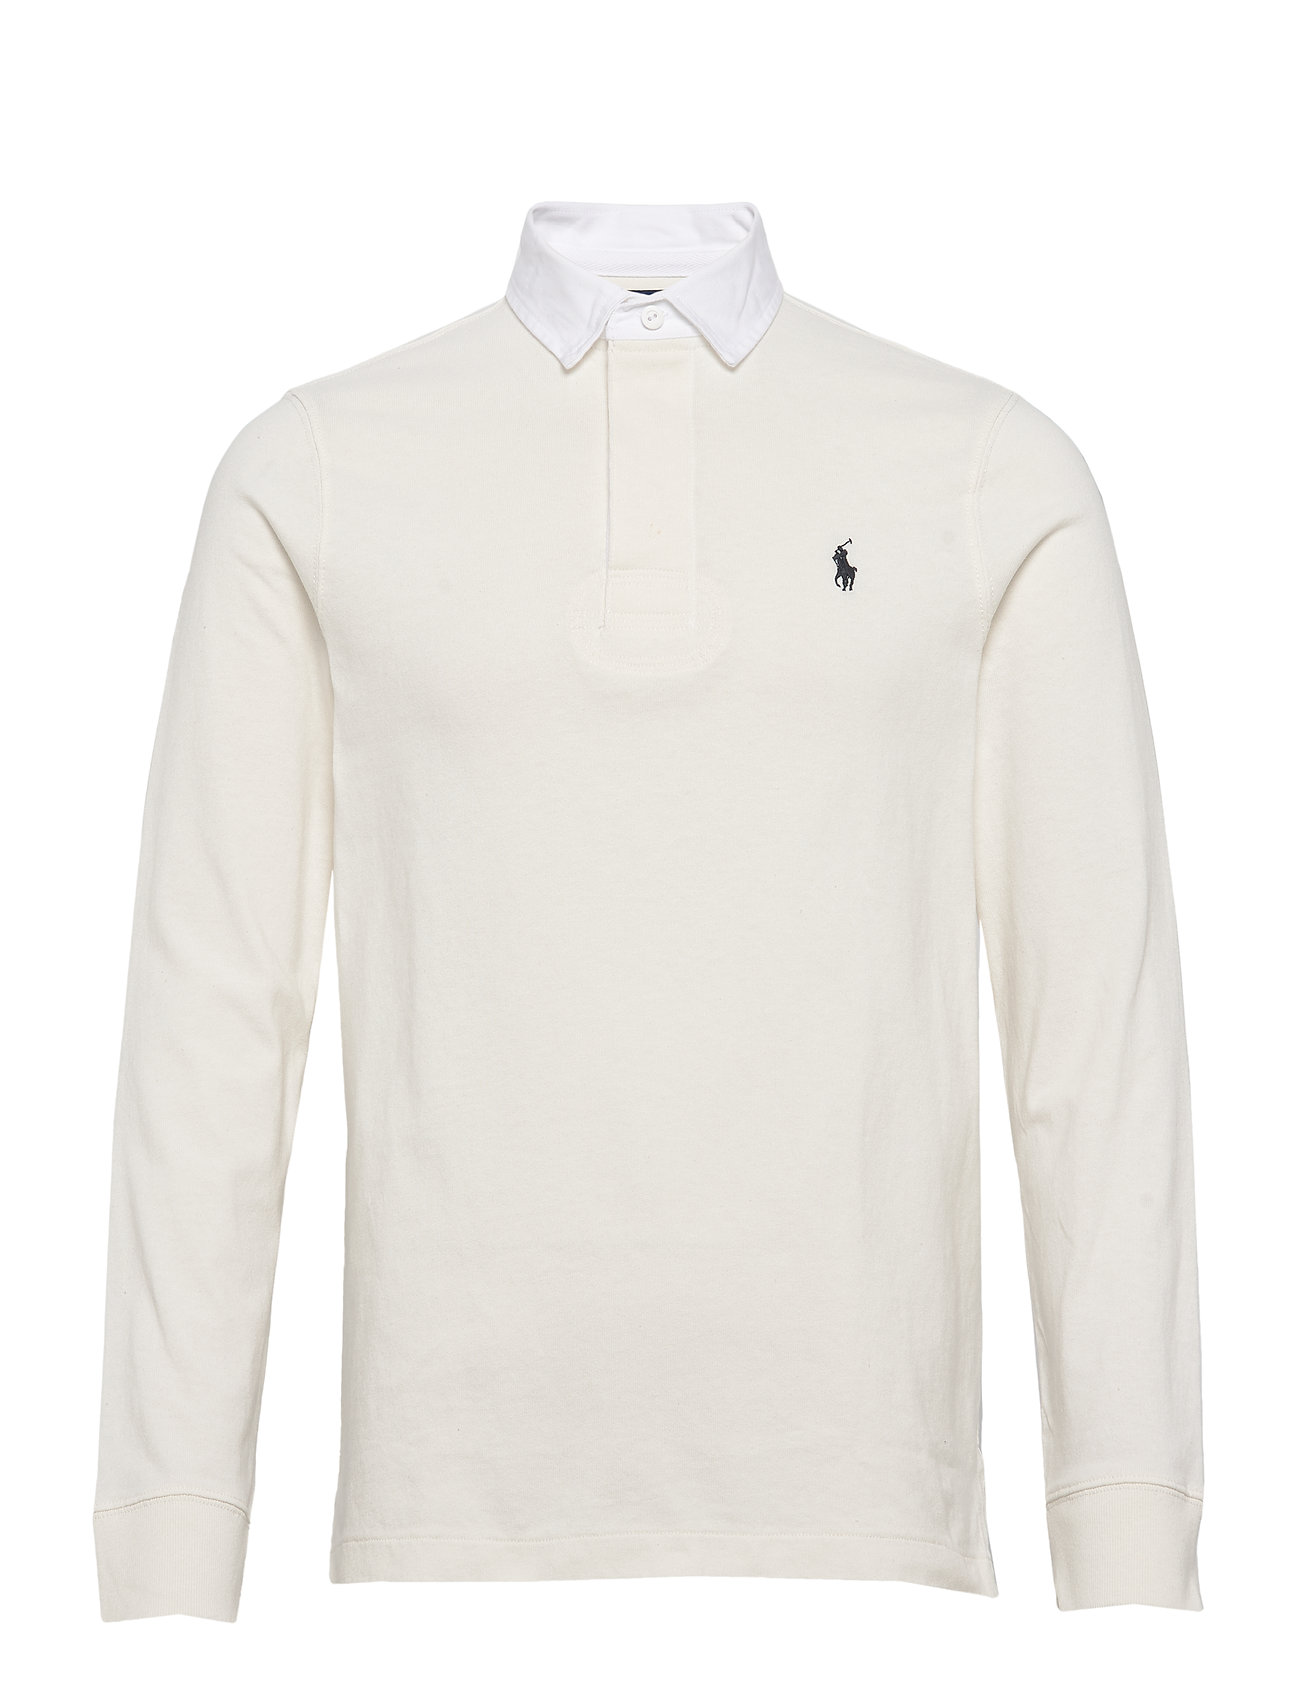 polo iconic rugby shirt